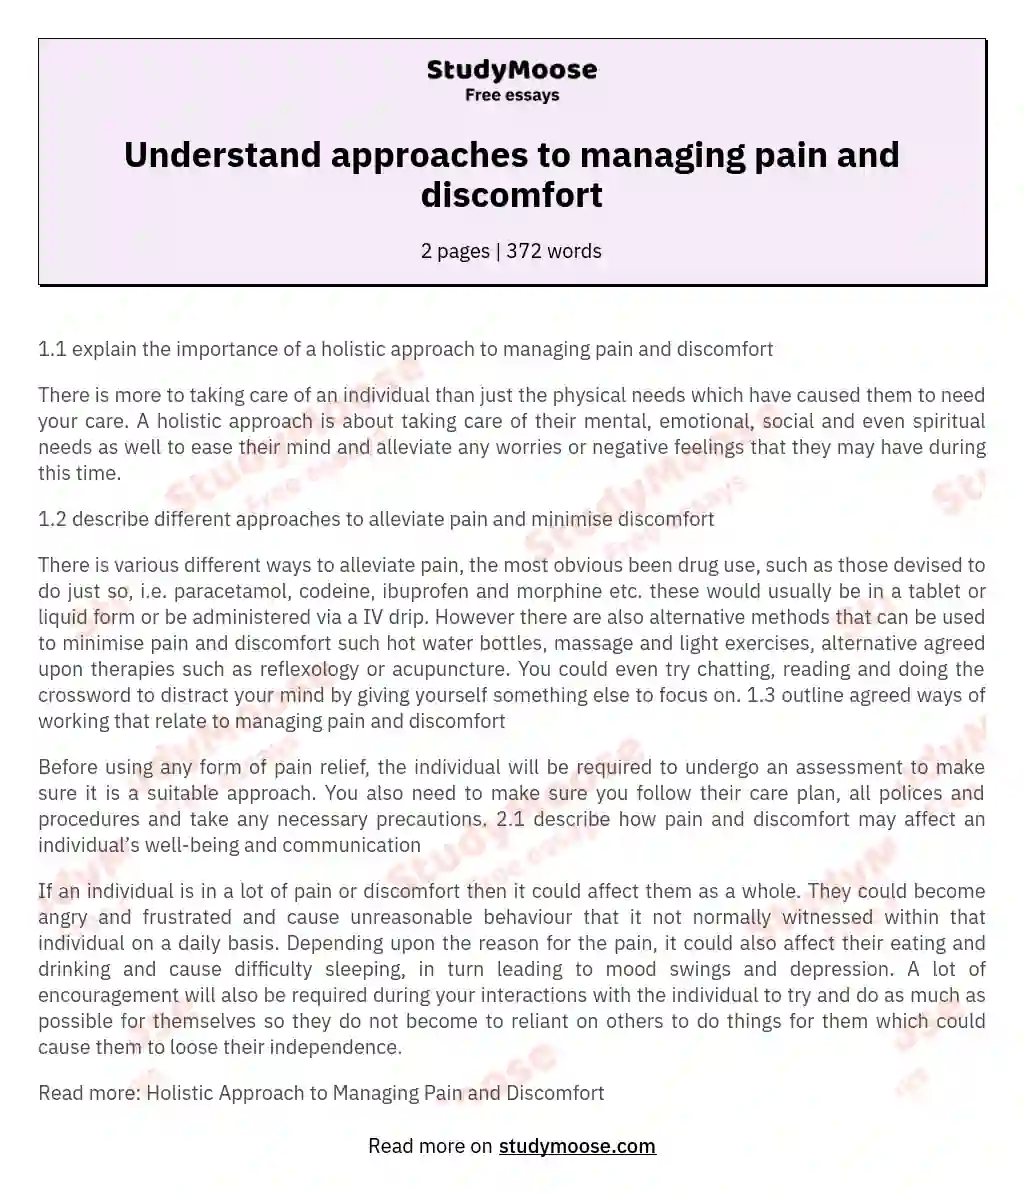 Understand approaches to managing pain and discomfort essay